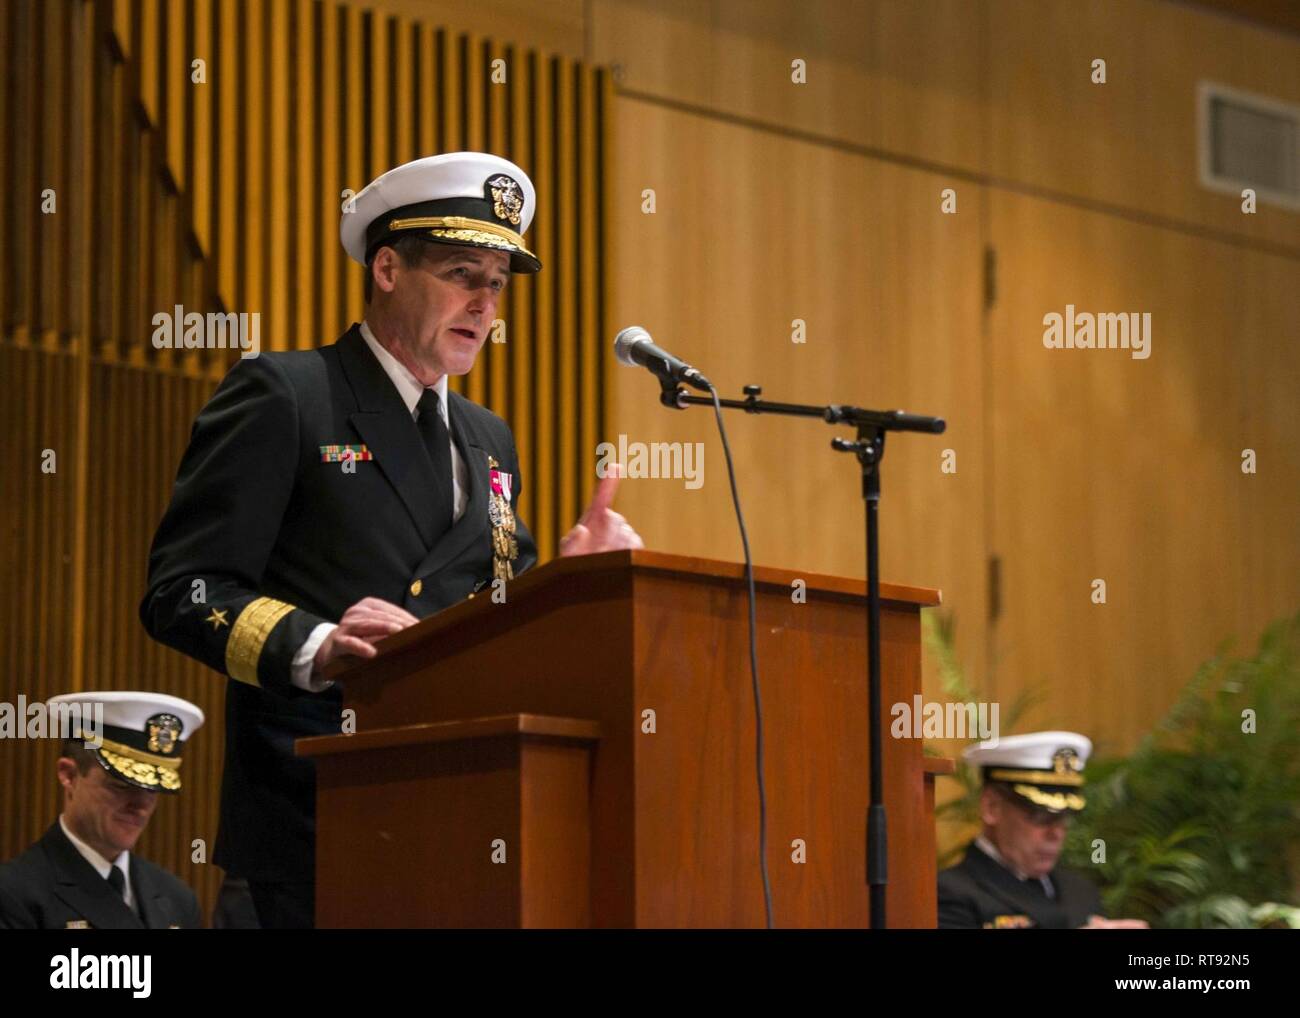 BANGOR, Wash. (Jan. 25, 2019) Rear Adm. Blake Converse, from Montoursville, Pennsylvania, delivers remarks during the change of command ceremony for Submarine Group 9. Rear Adm. Douglas Perry, from Biloxi, Mississippi, relieved Converse during the ceremony held at the Bangor Chapel. Stock Photo